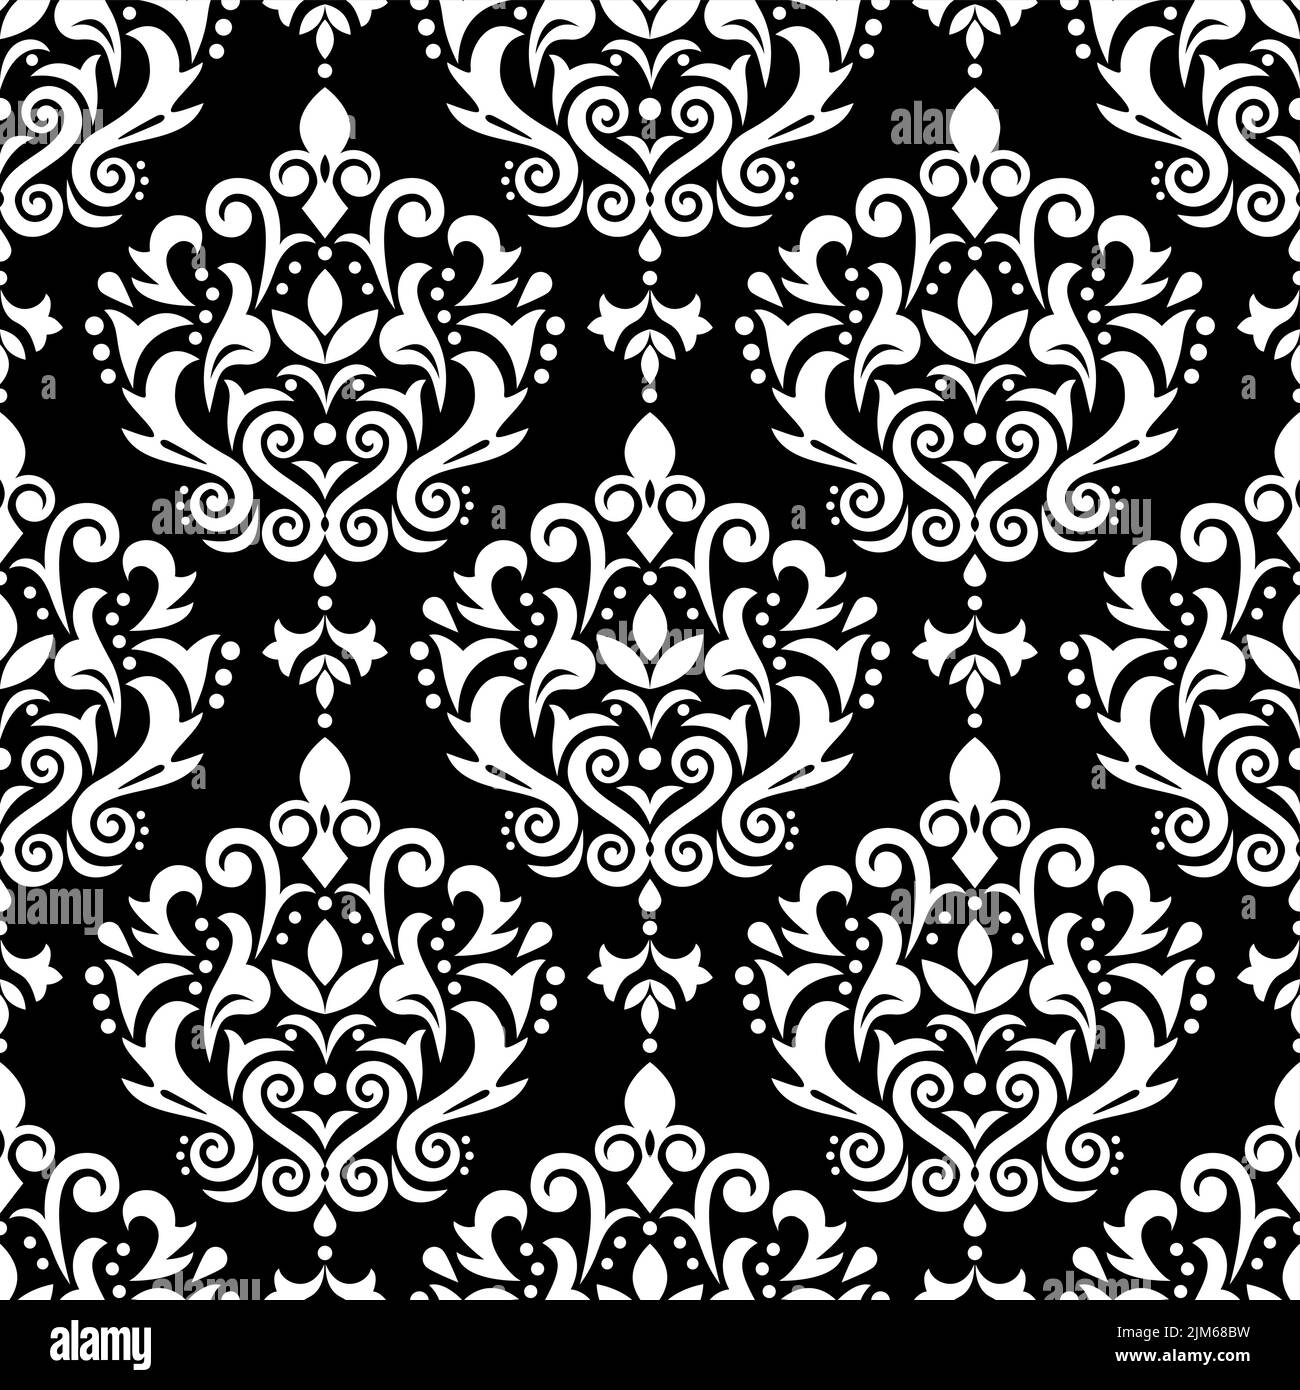 Damask elegant vector seamless pattern, victorian textile or fabric print design with flowers, swirls and leaves in white on black Stock Vector